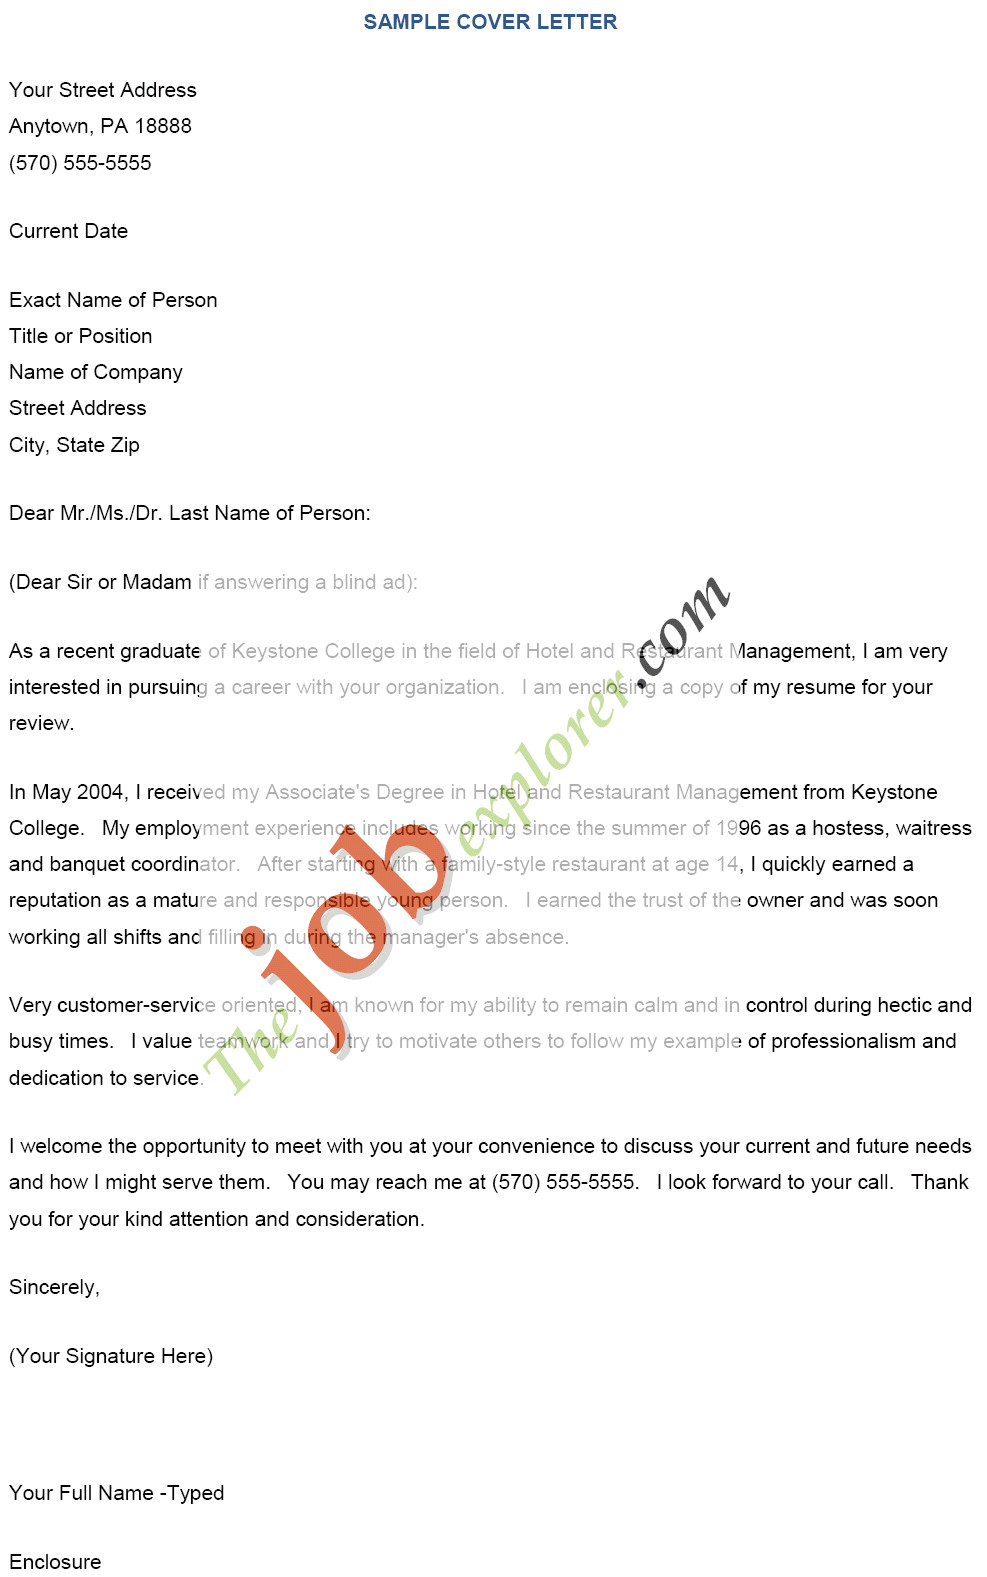 effective cover letter extraordinary tips for writing an effective cover letter cover letter tips